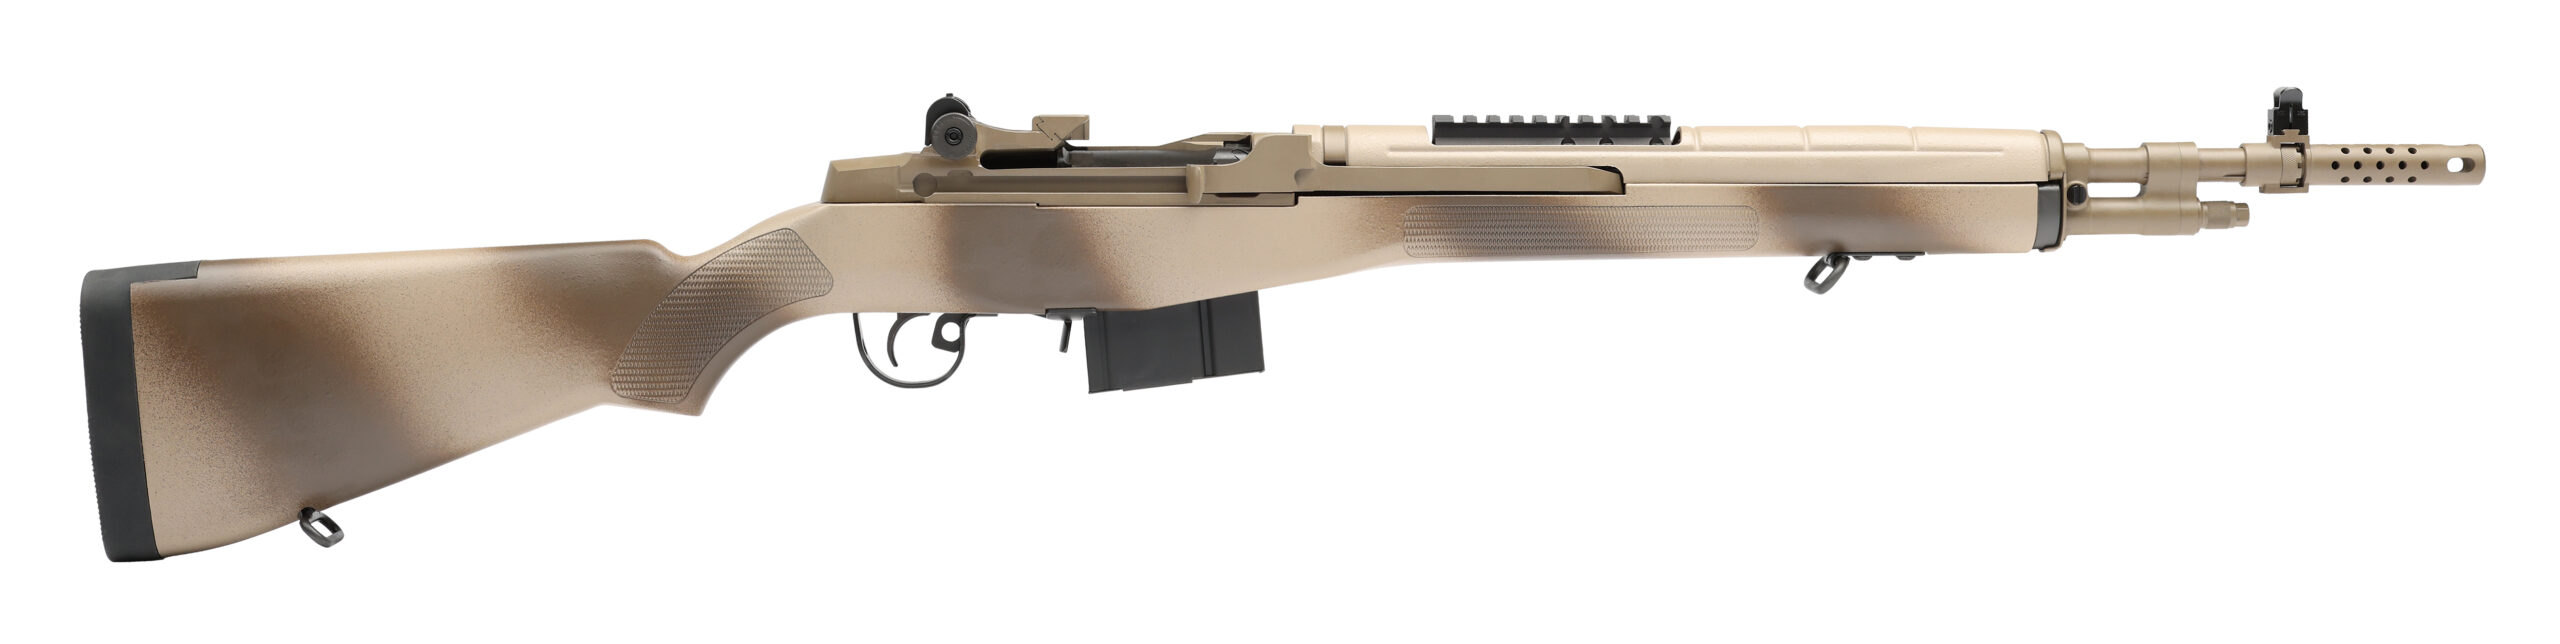 New NBS Exclusive Two-Tone Desert FDE M1A Rifles From Springfield